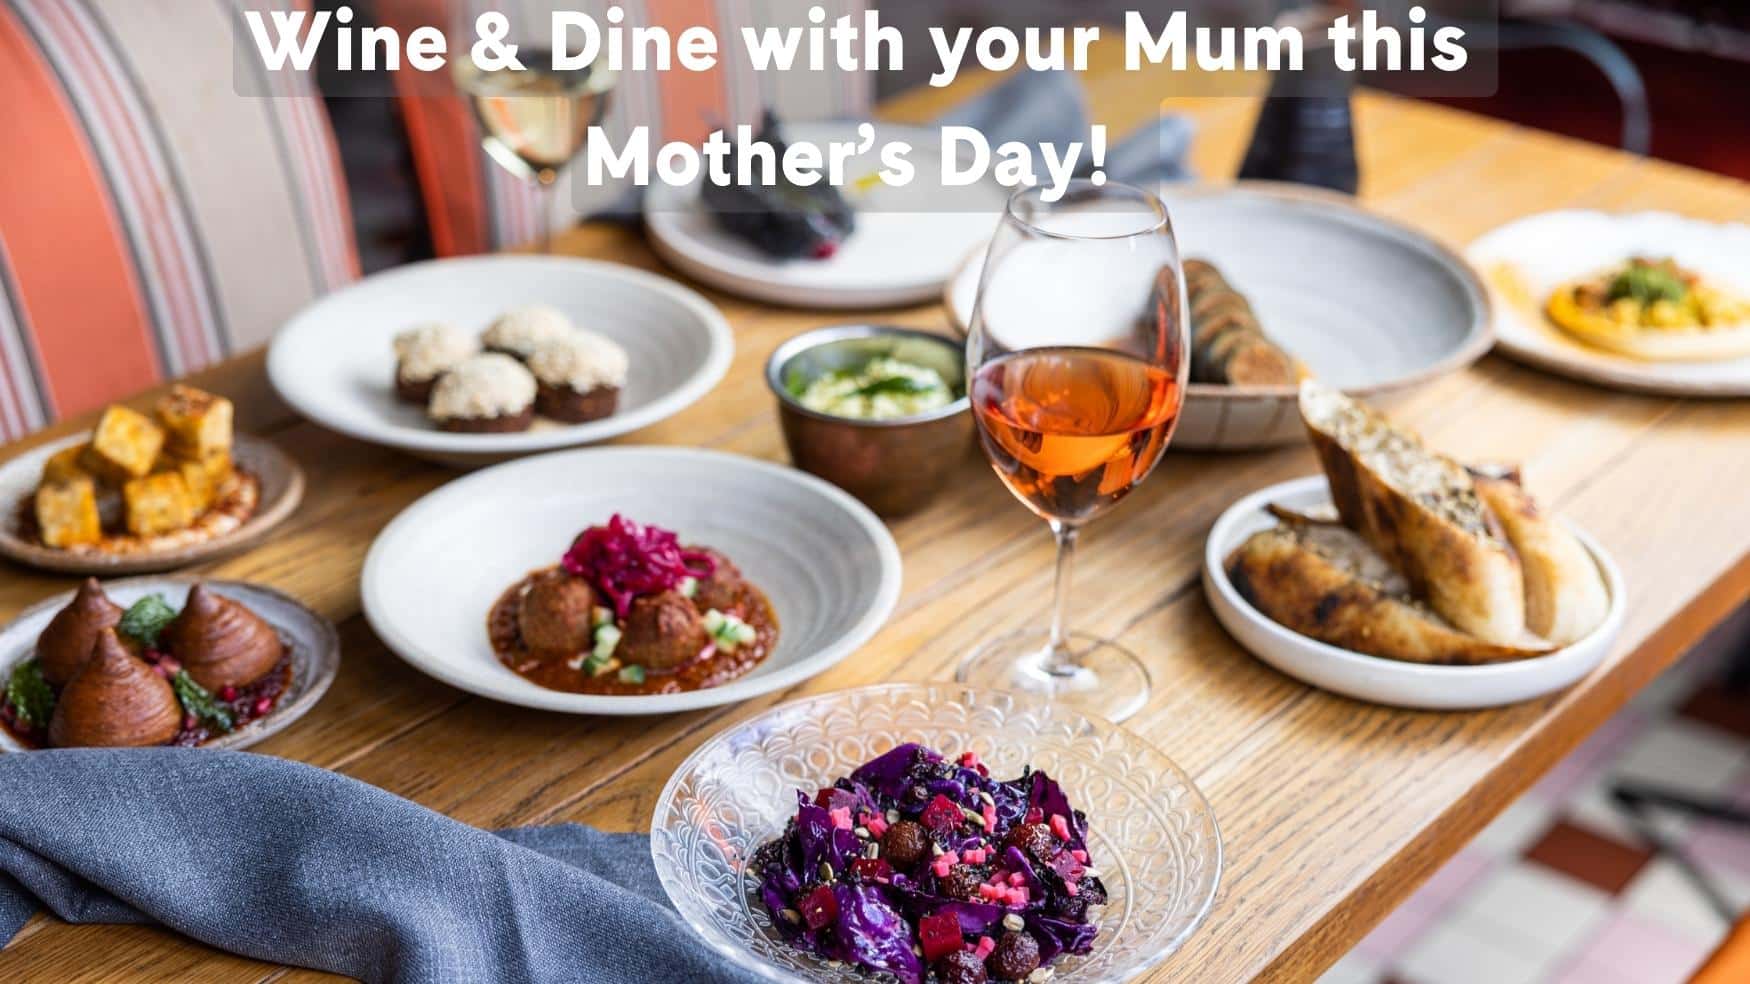 Wine & Dine with your Mum this Mother’s Day!